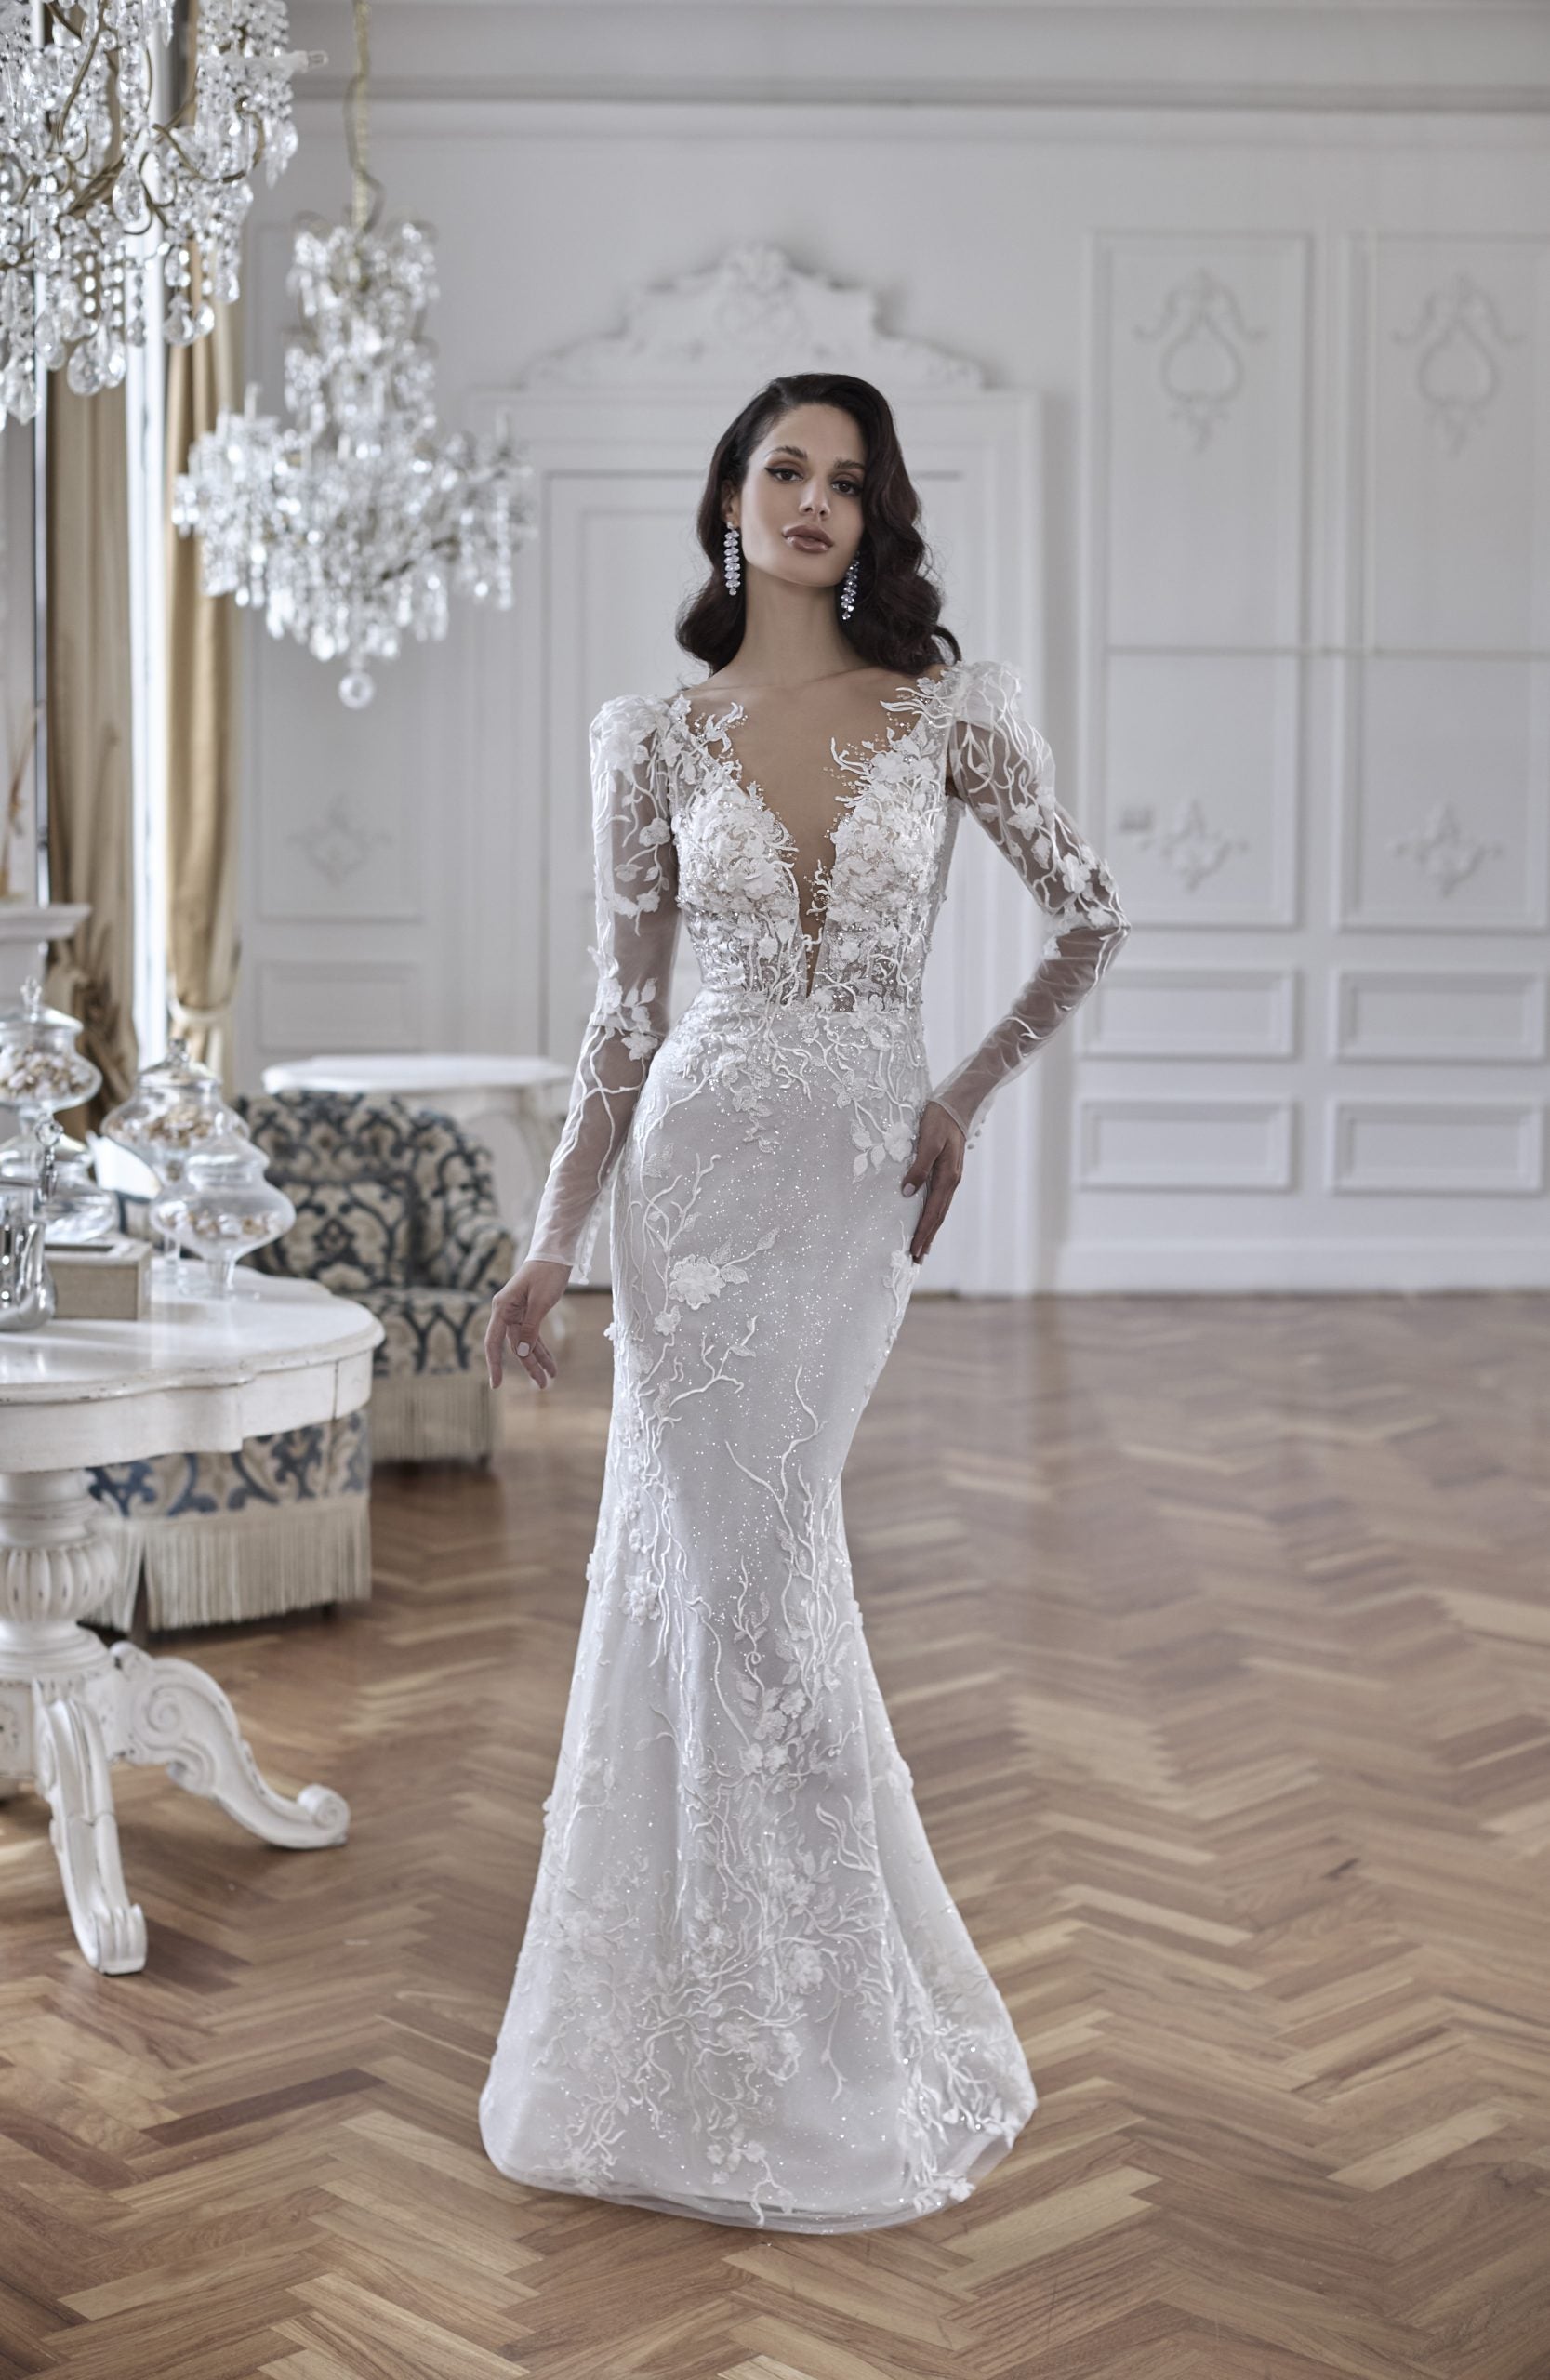 Long Sleeve Fit And Flare Wedding Dress With 3D Florals by Maison Signore - Image 1